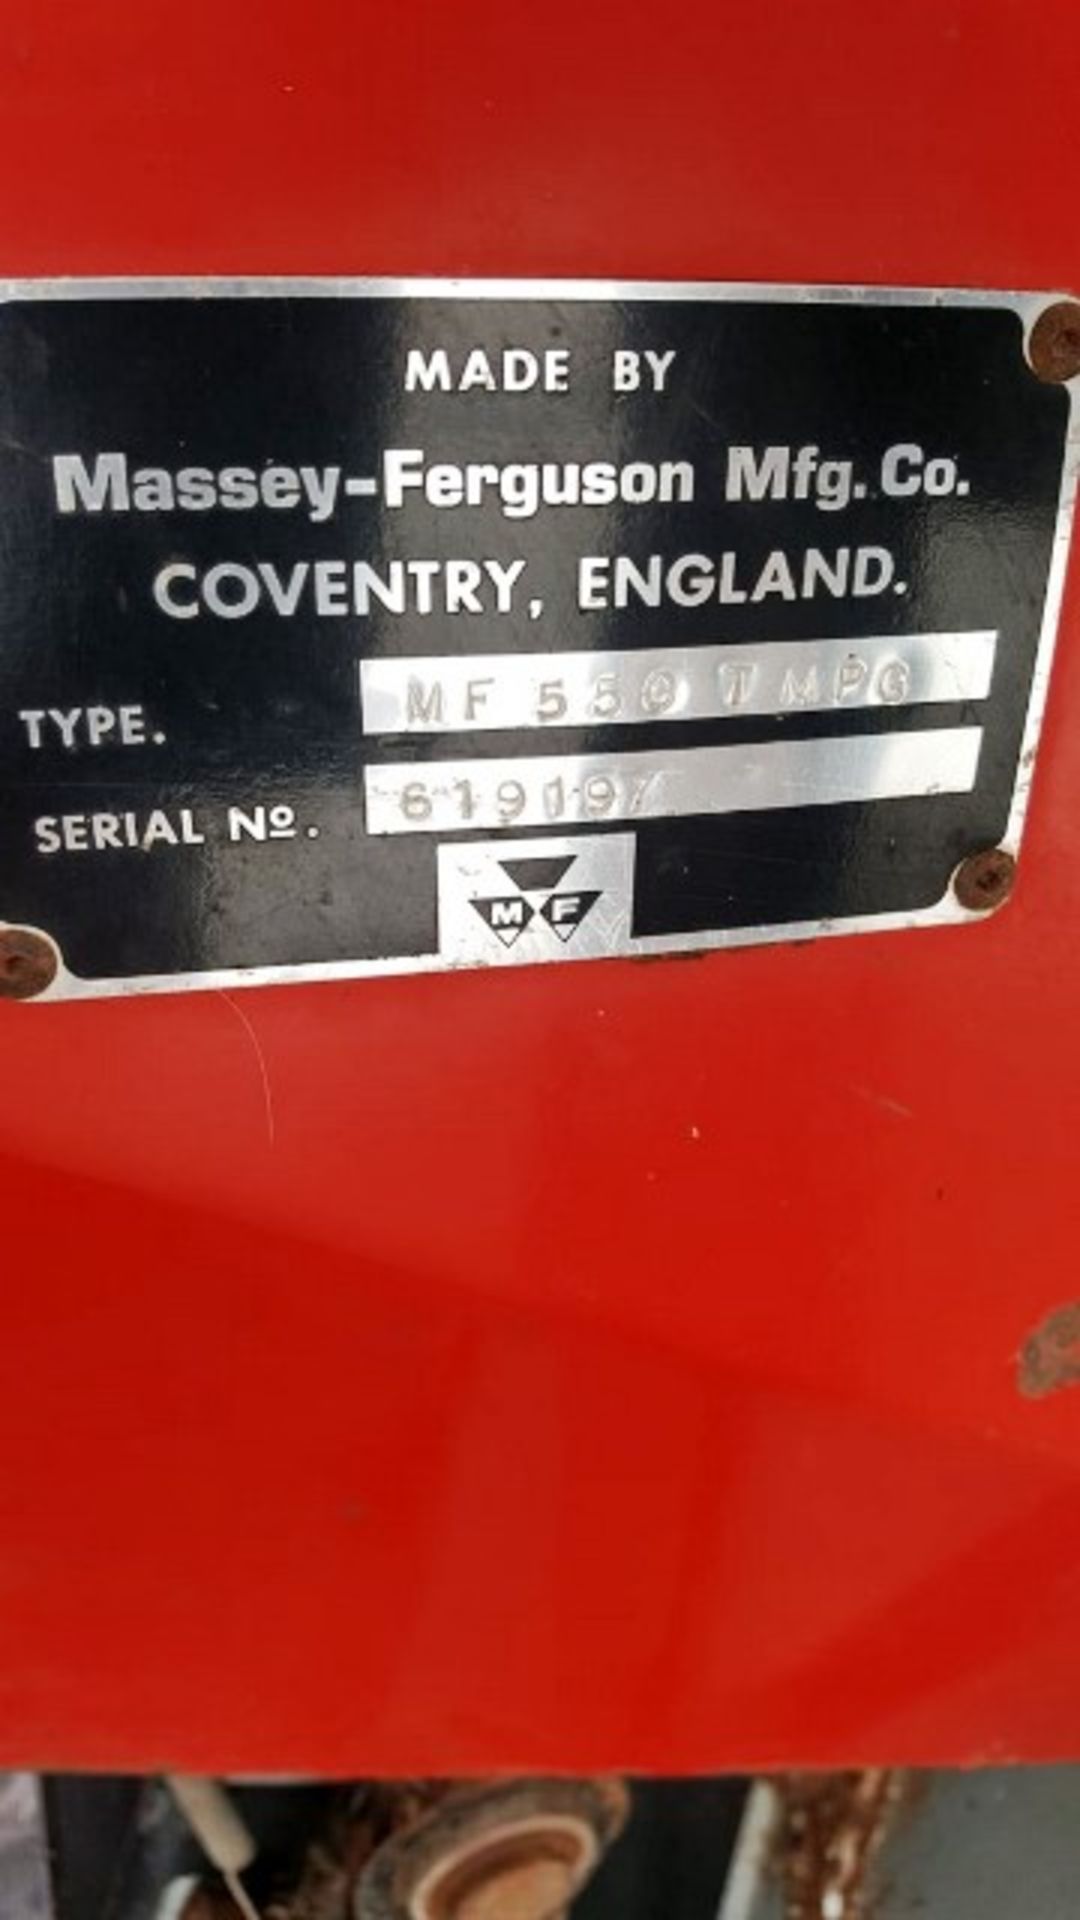 1979 MASSEY FERSUSON 550 tractor s/n 619197. Reg No OIA 804. 863hrs (not verifed) - Image 7 of 7